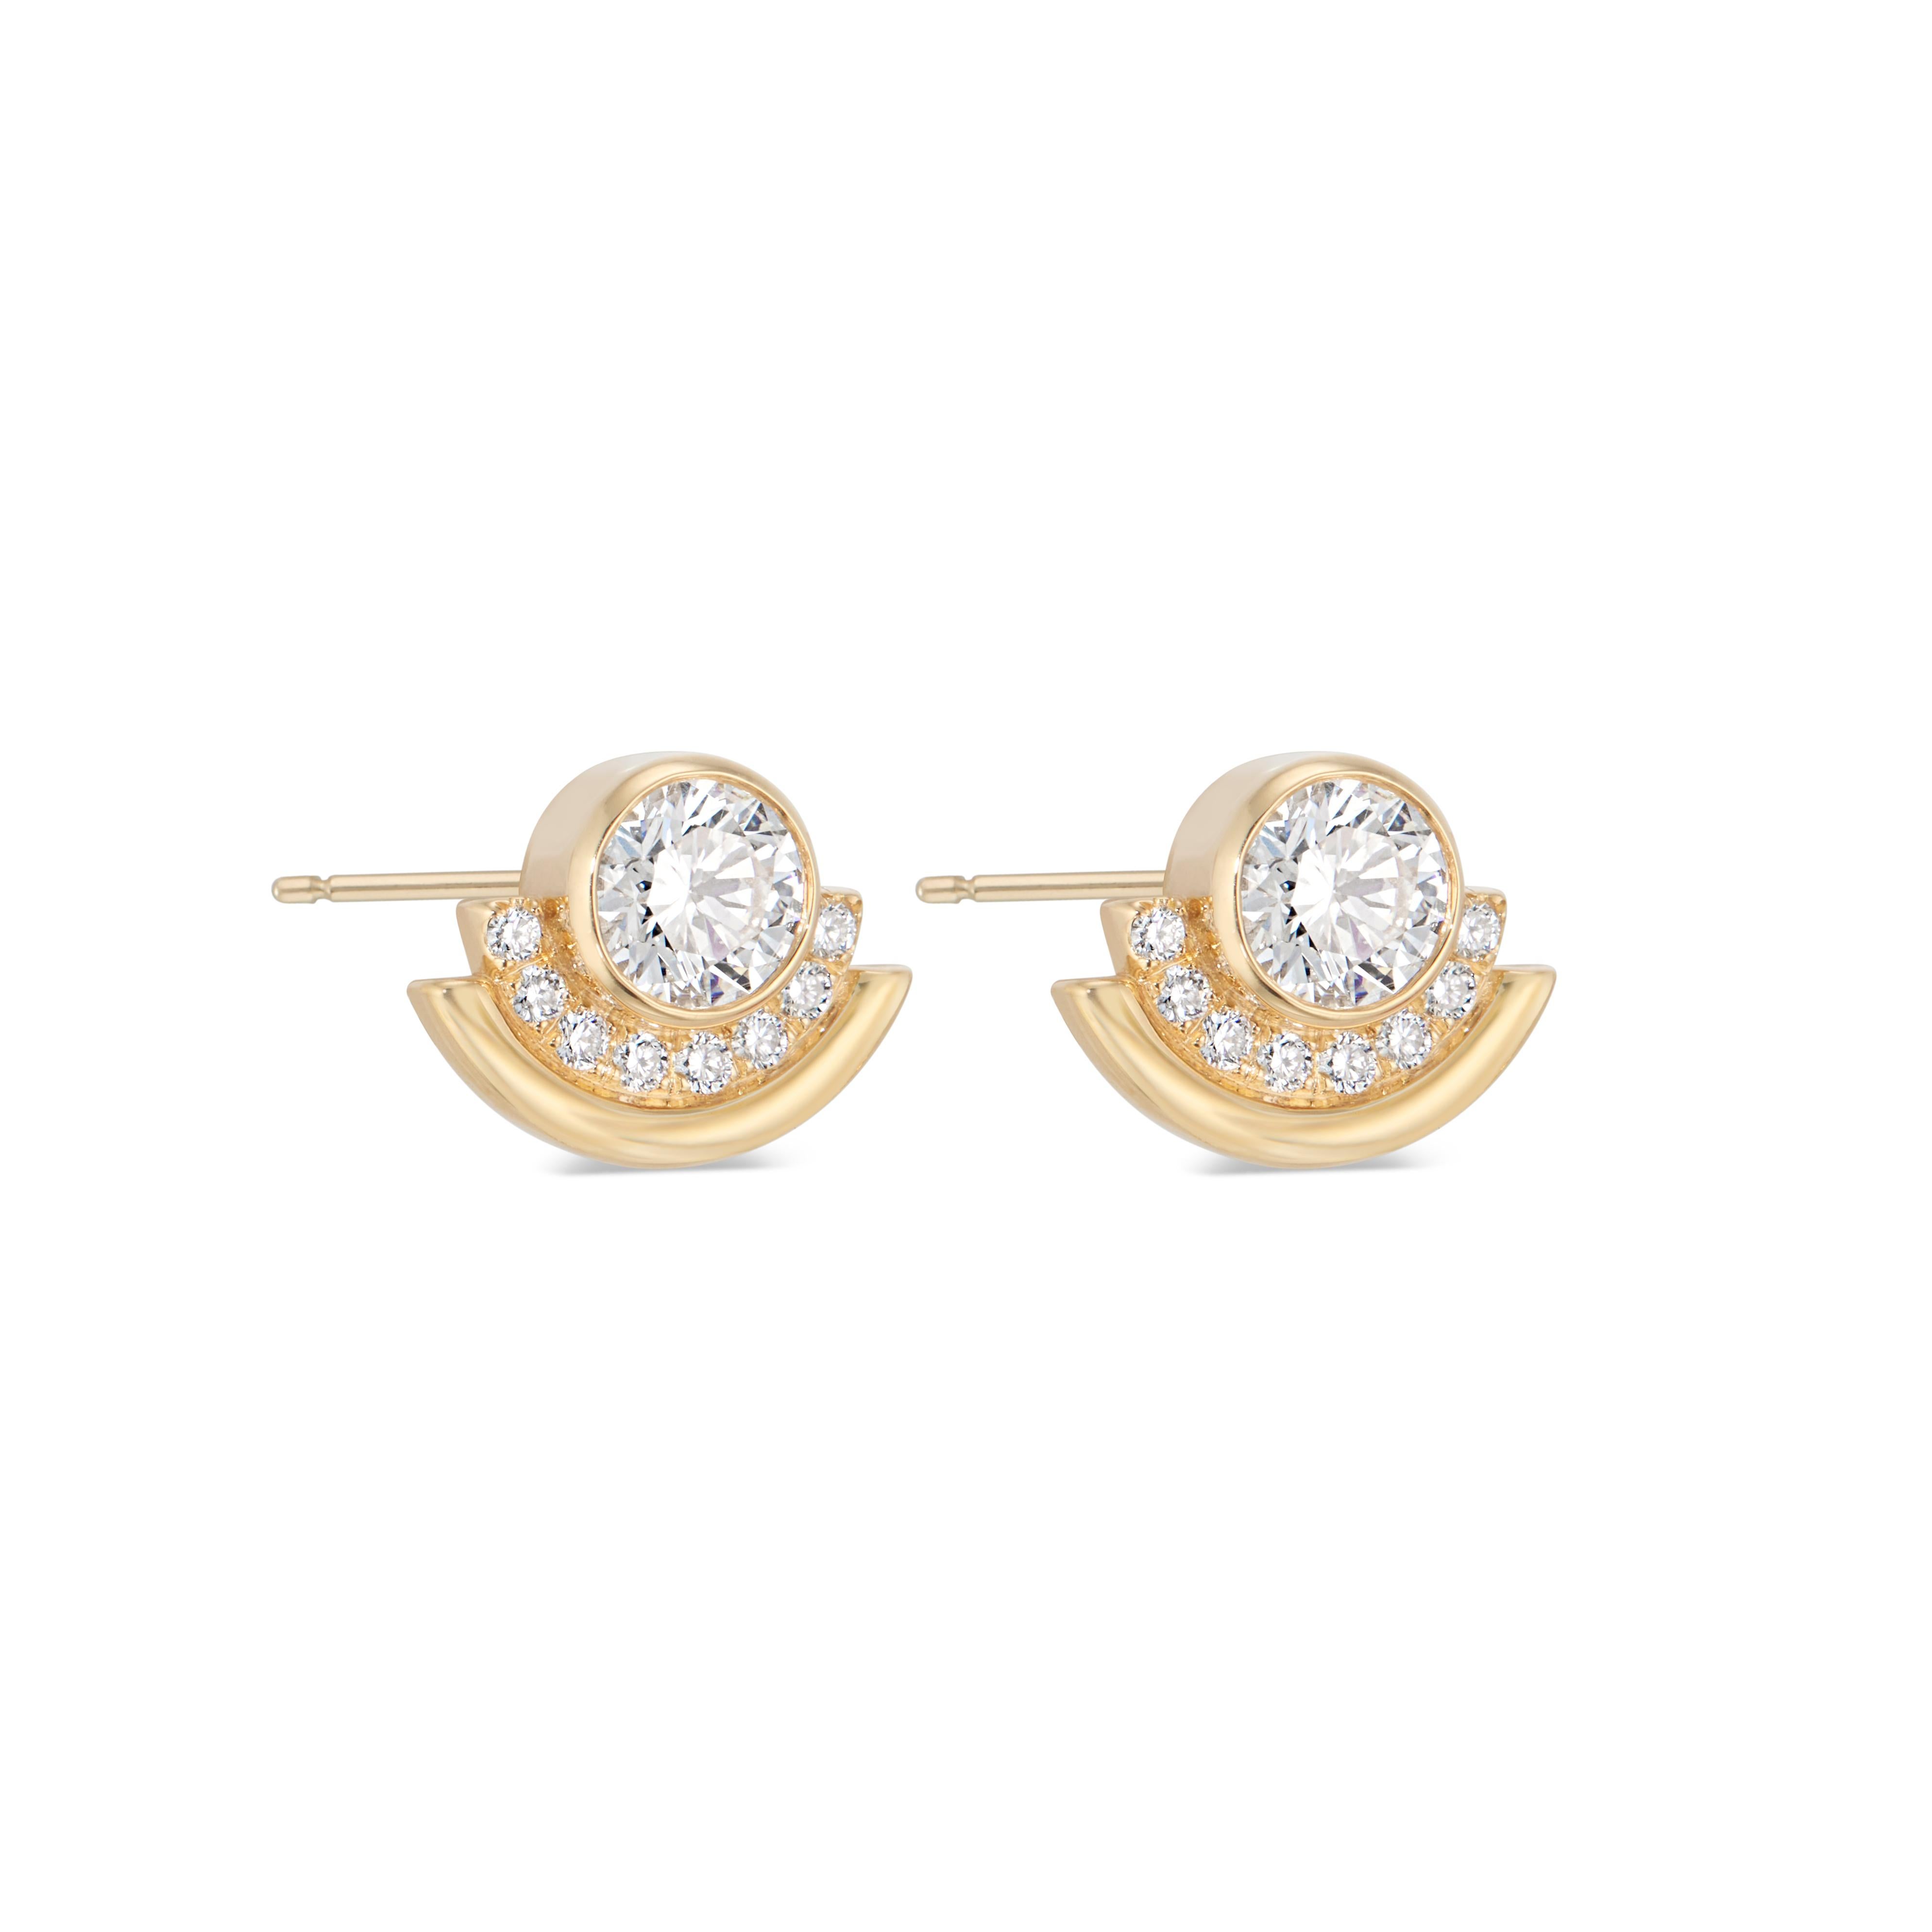 Casey Perez 18K Gold Arc Stud Earrings, 1.16 carats of Brilliant Cut Diamonds In New Condition For Sale In Brooklyn, NY